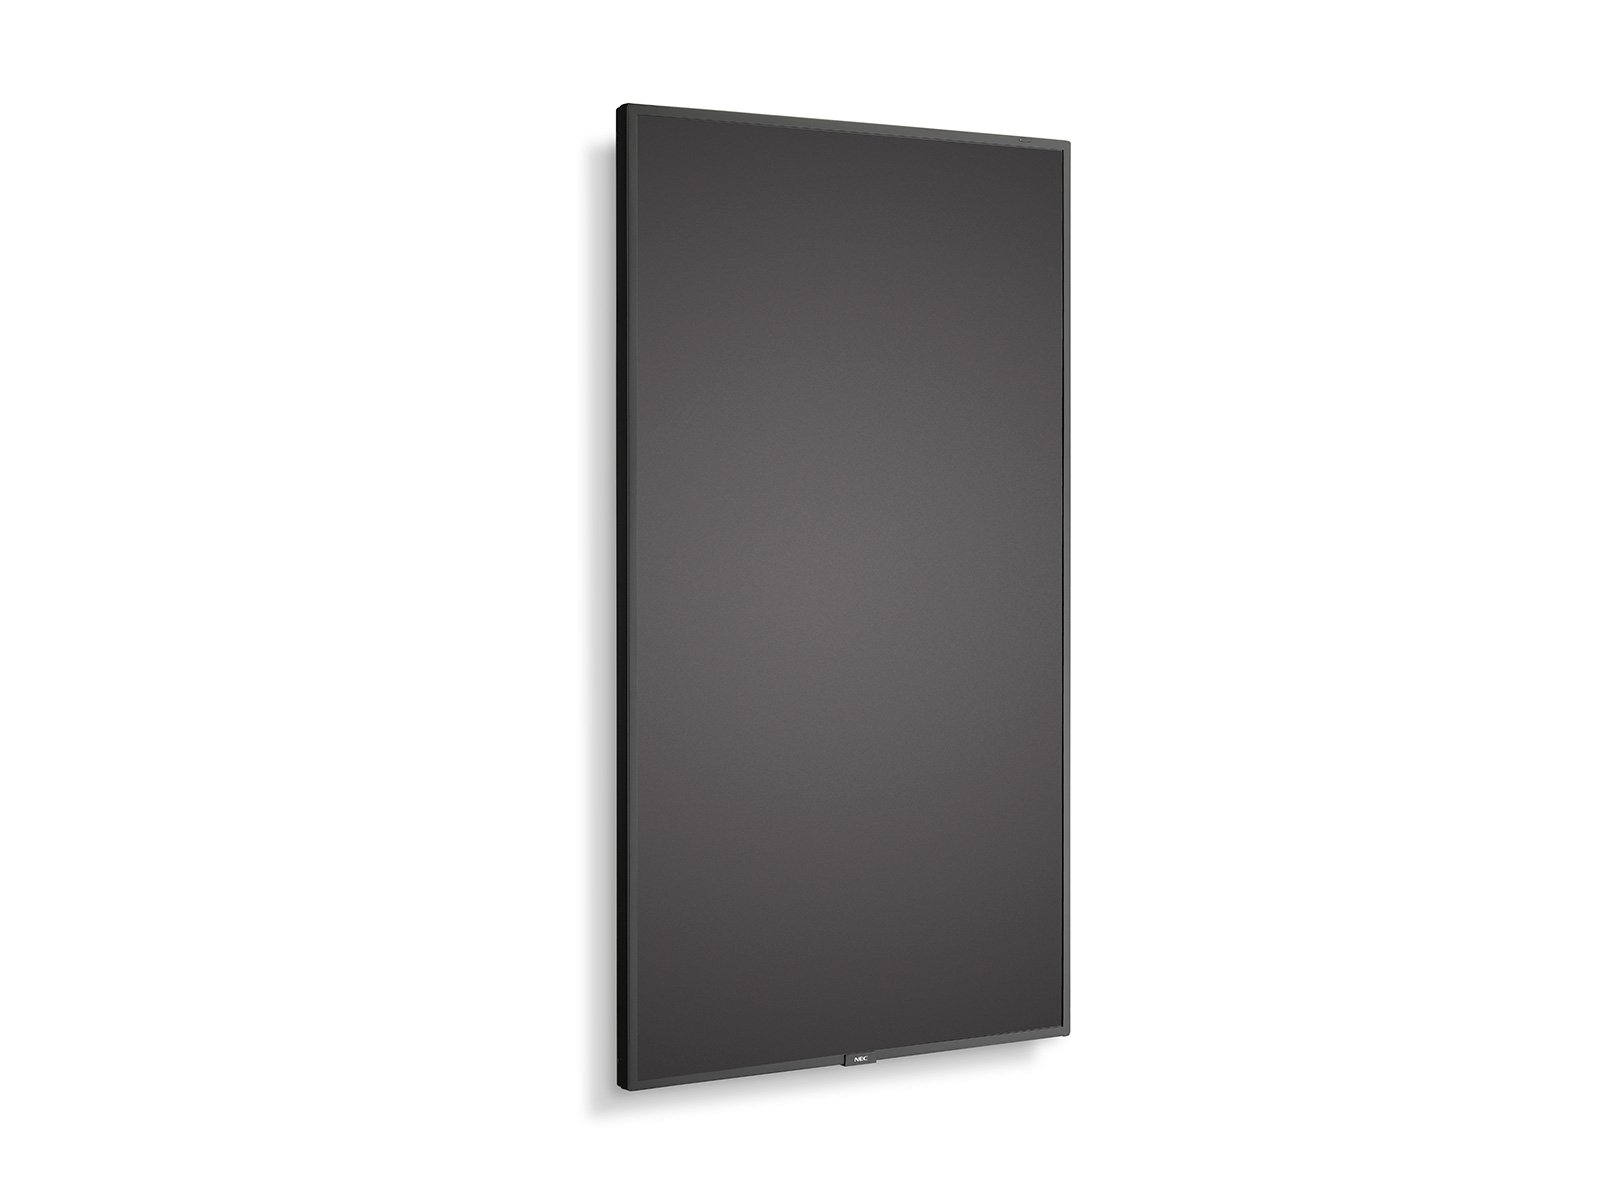 NEC MultiSync ME551 - 55 Inch - 400 cd/m² - Ultra HD - 3840x2160 Pixel - 18/7 - Message Essential Large Format Display